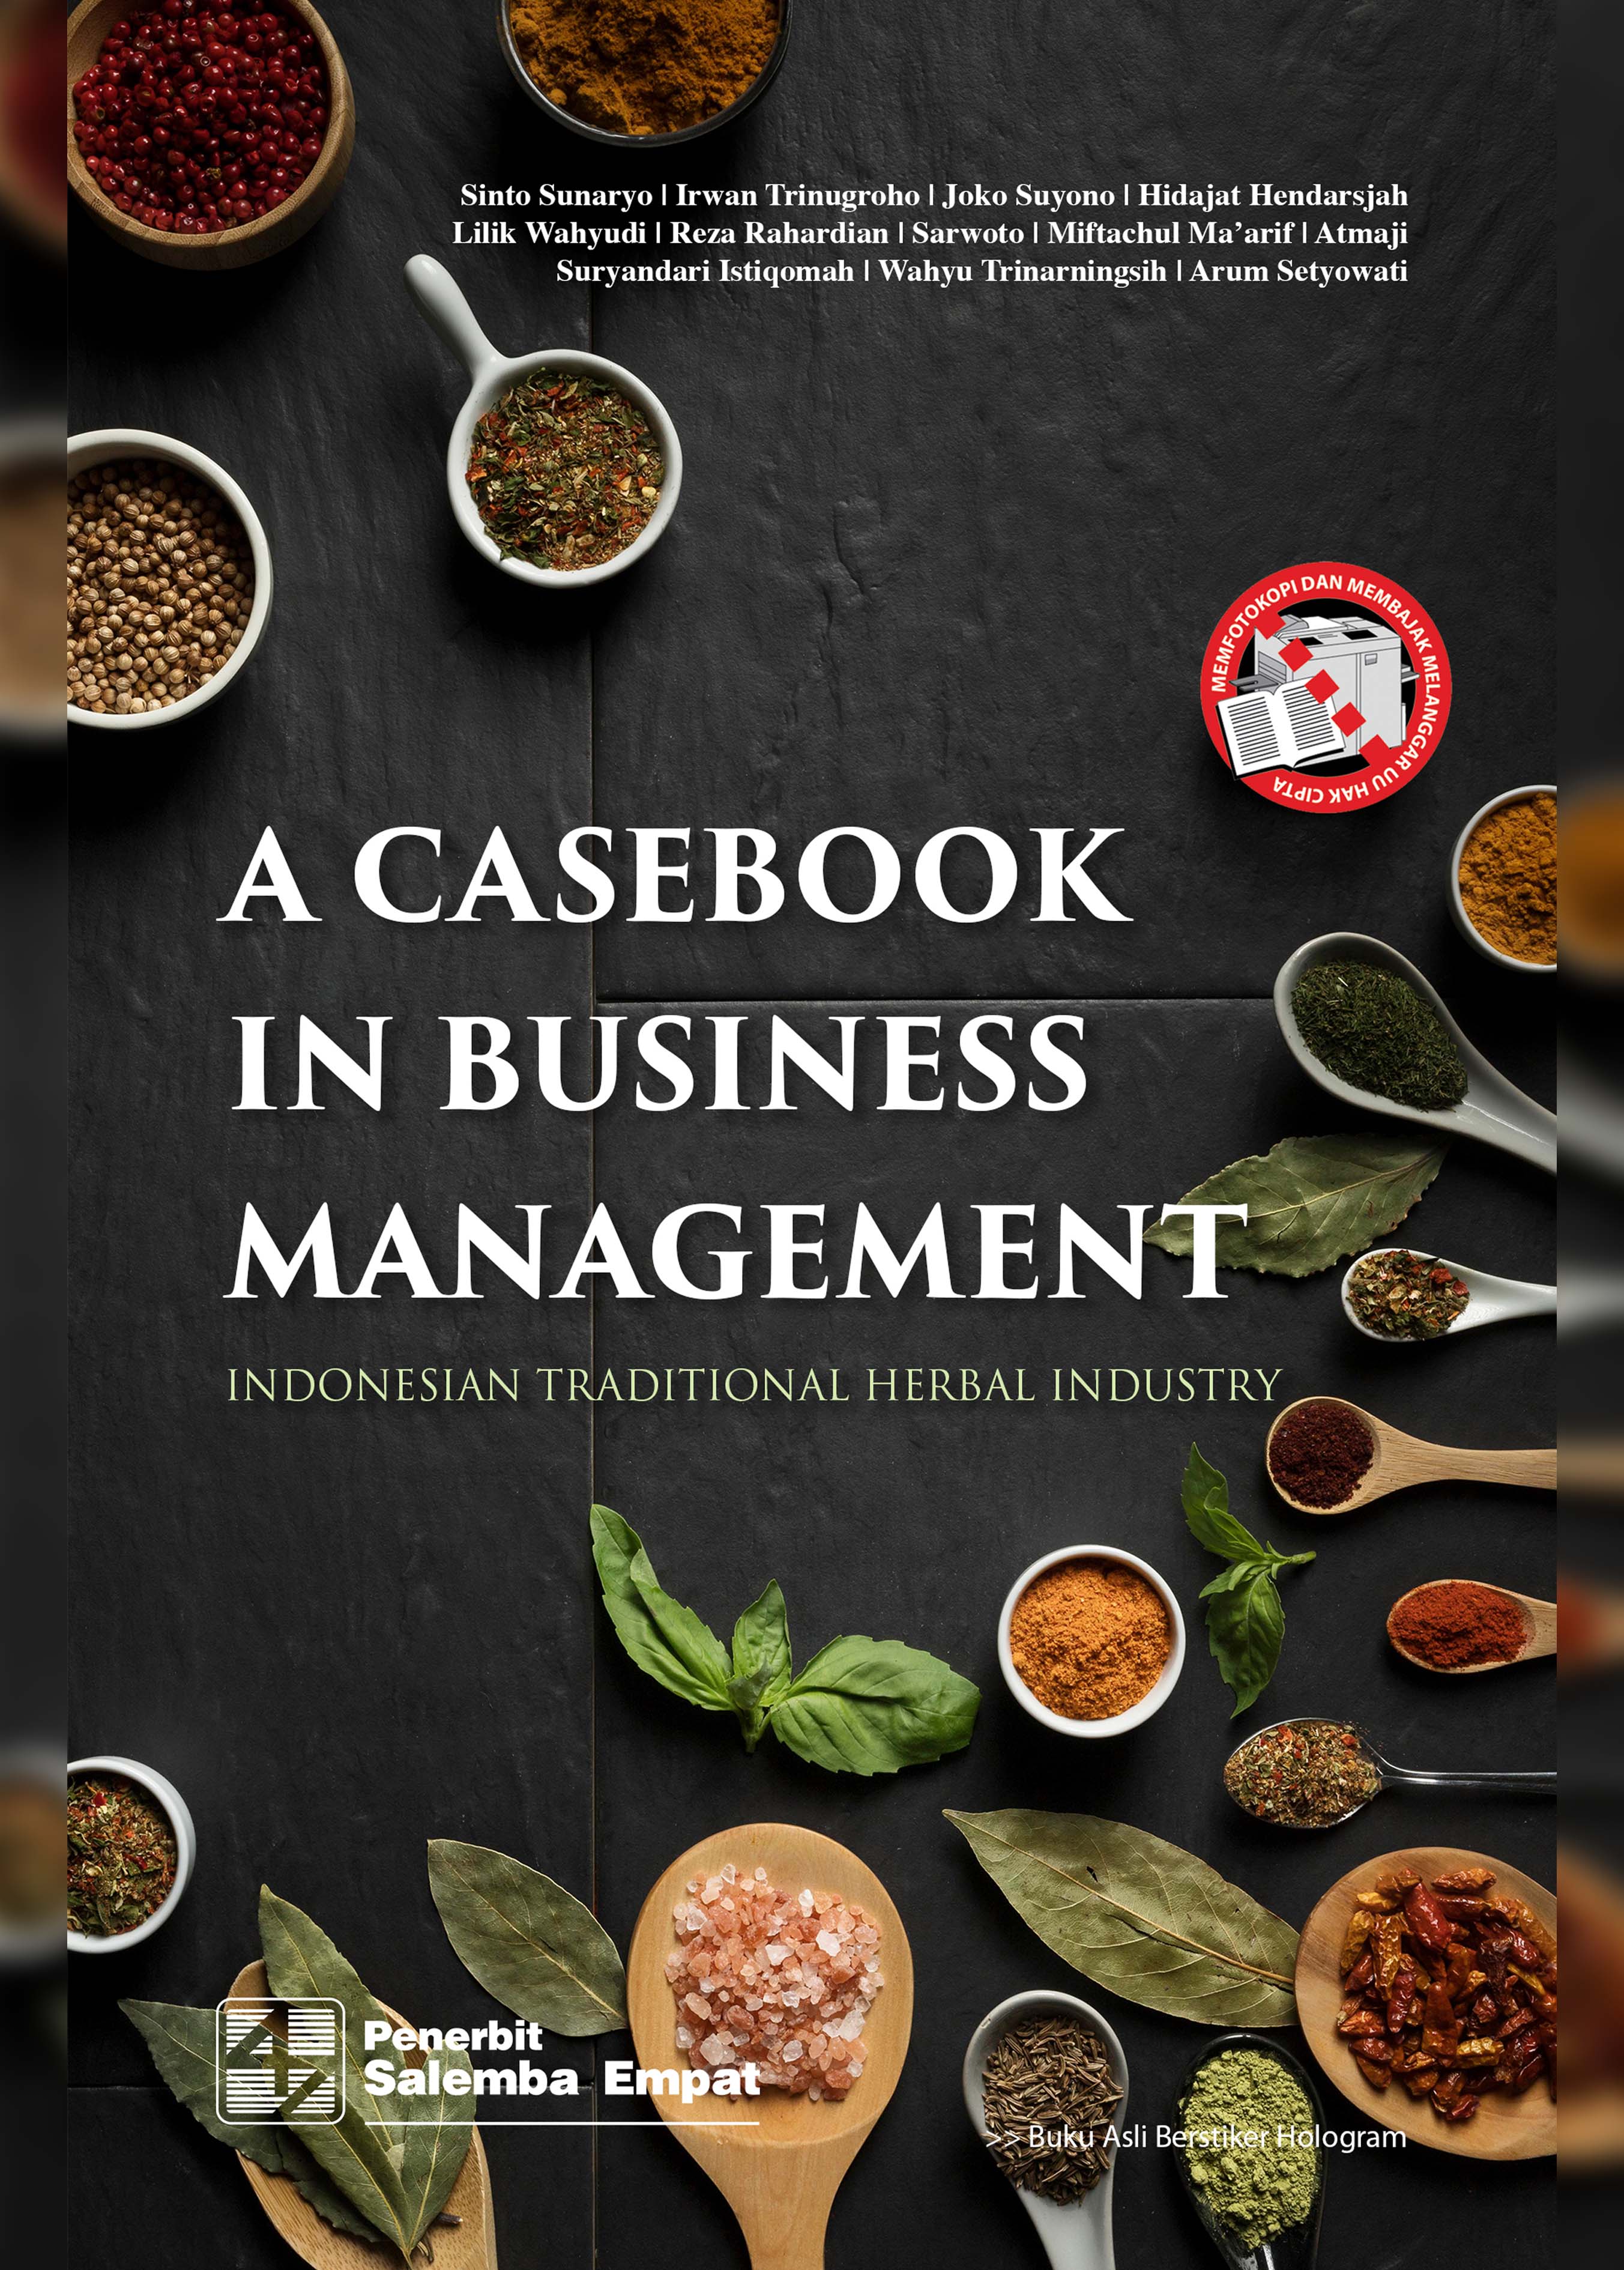 eBook A Casebook in Business Management: Indonesian Traditional Herbal Industry (Sinto Sunaryo)